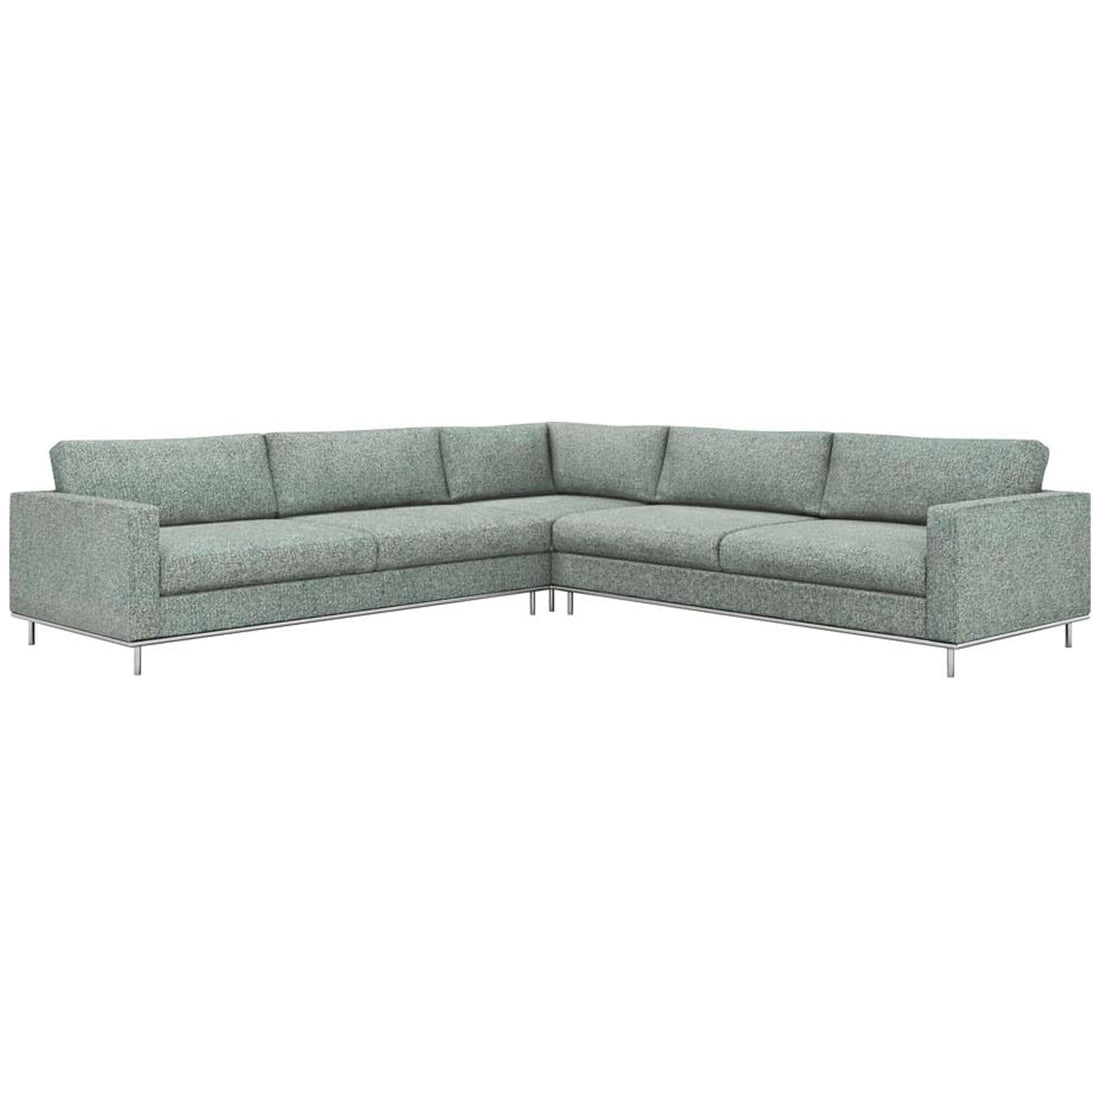 Interlude Home Valencia 3-Piece Sectional - Pool